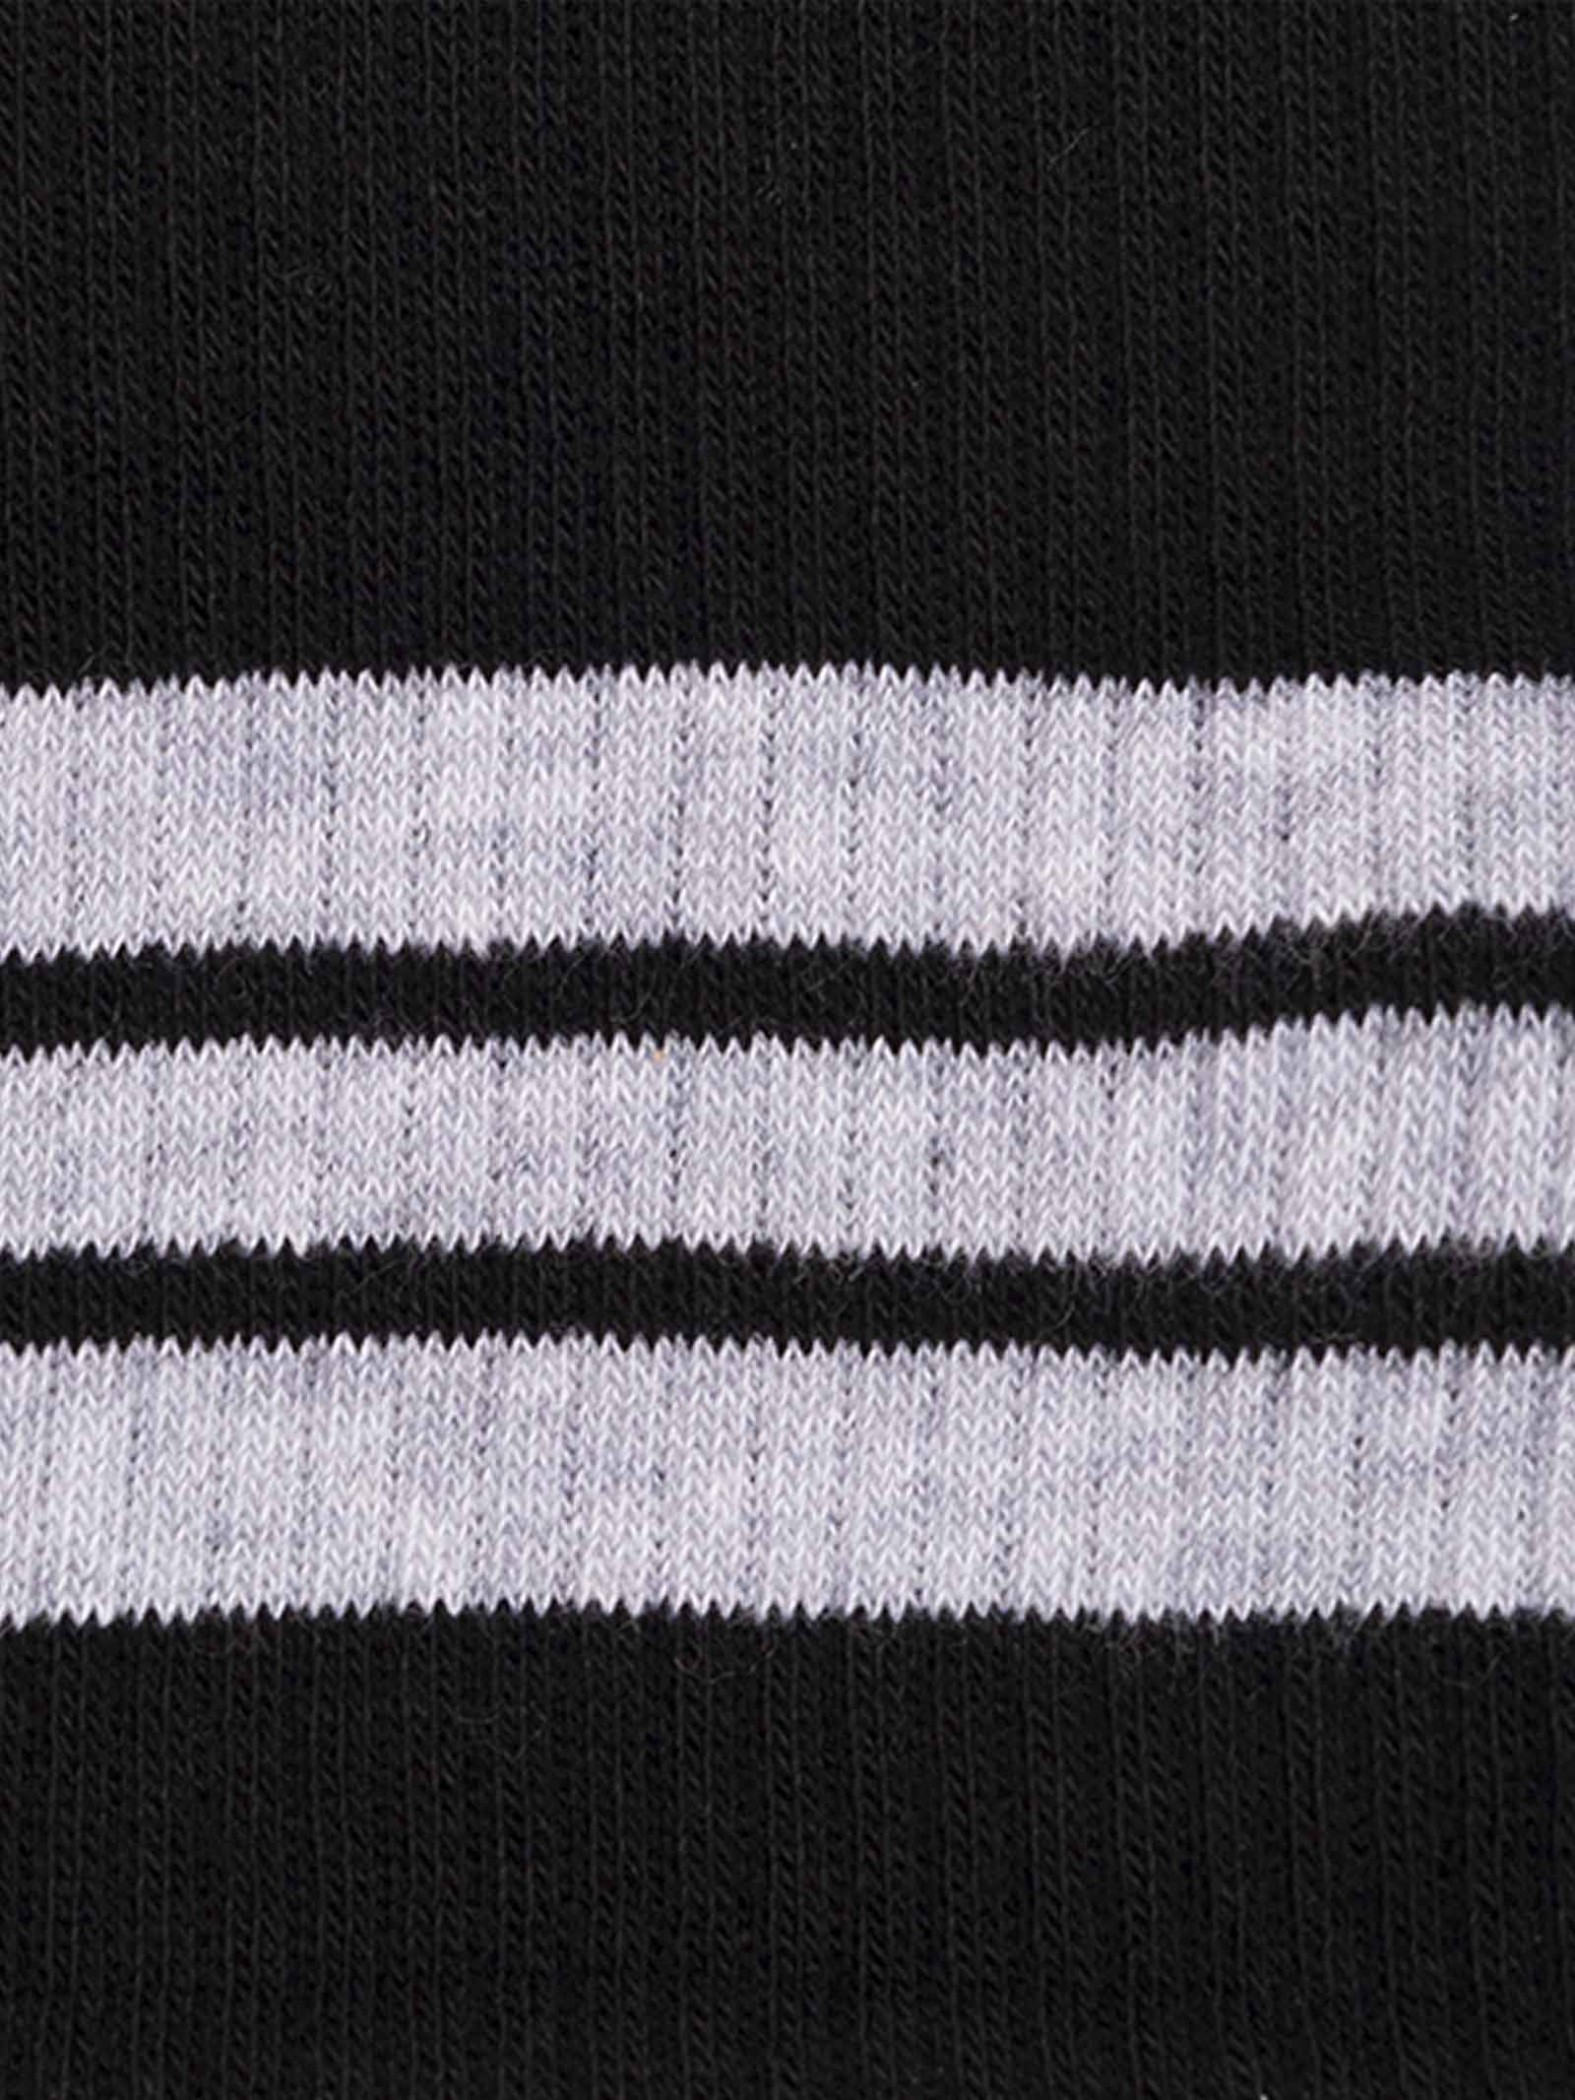 Men's sport patterned crew socks with stripes in cool cotton - Made in Italy